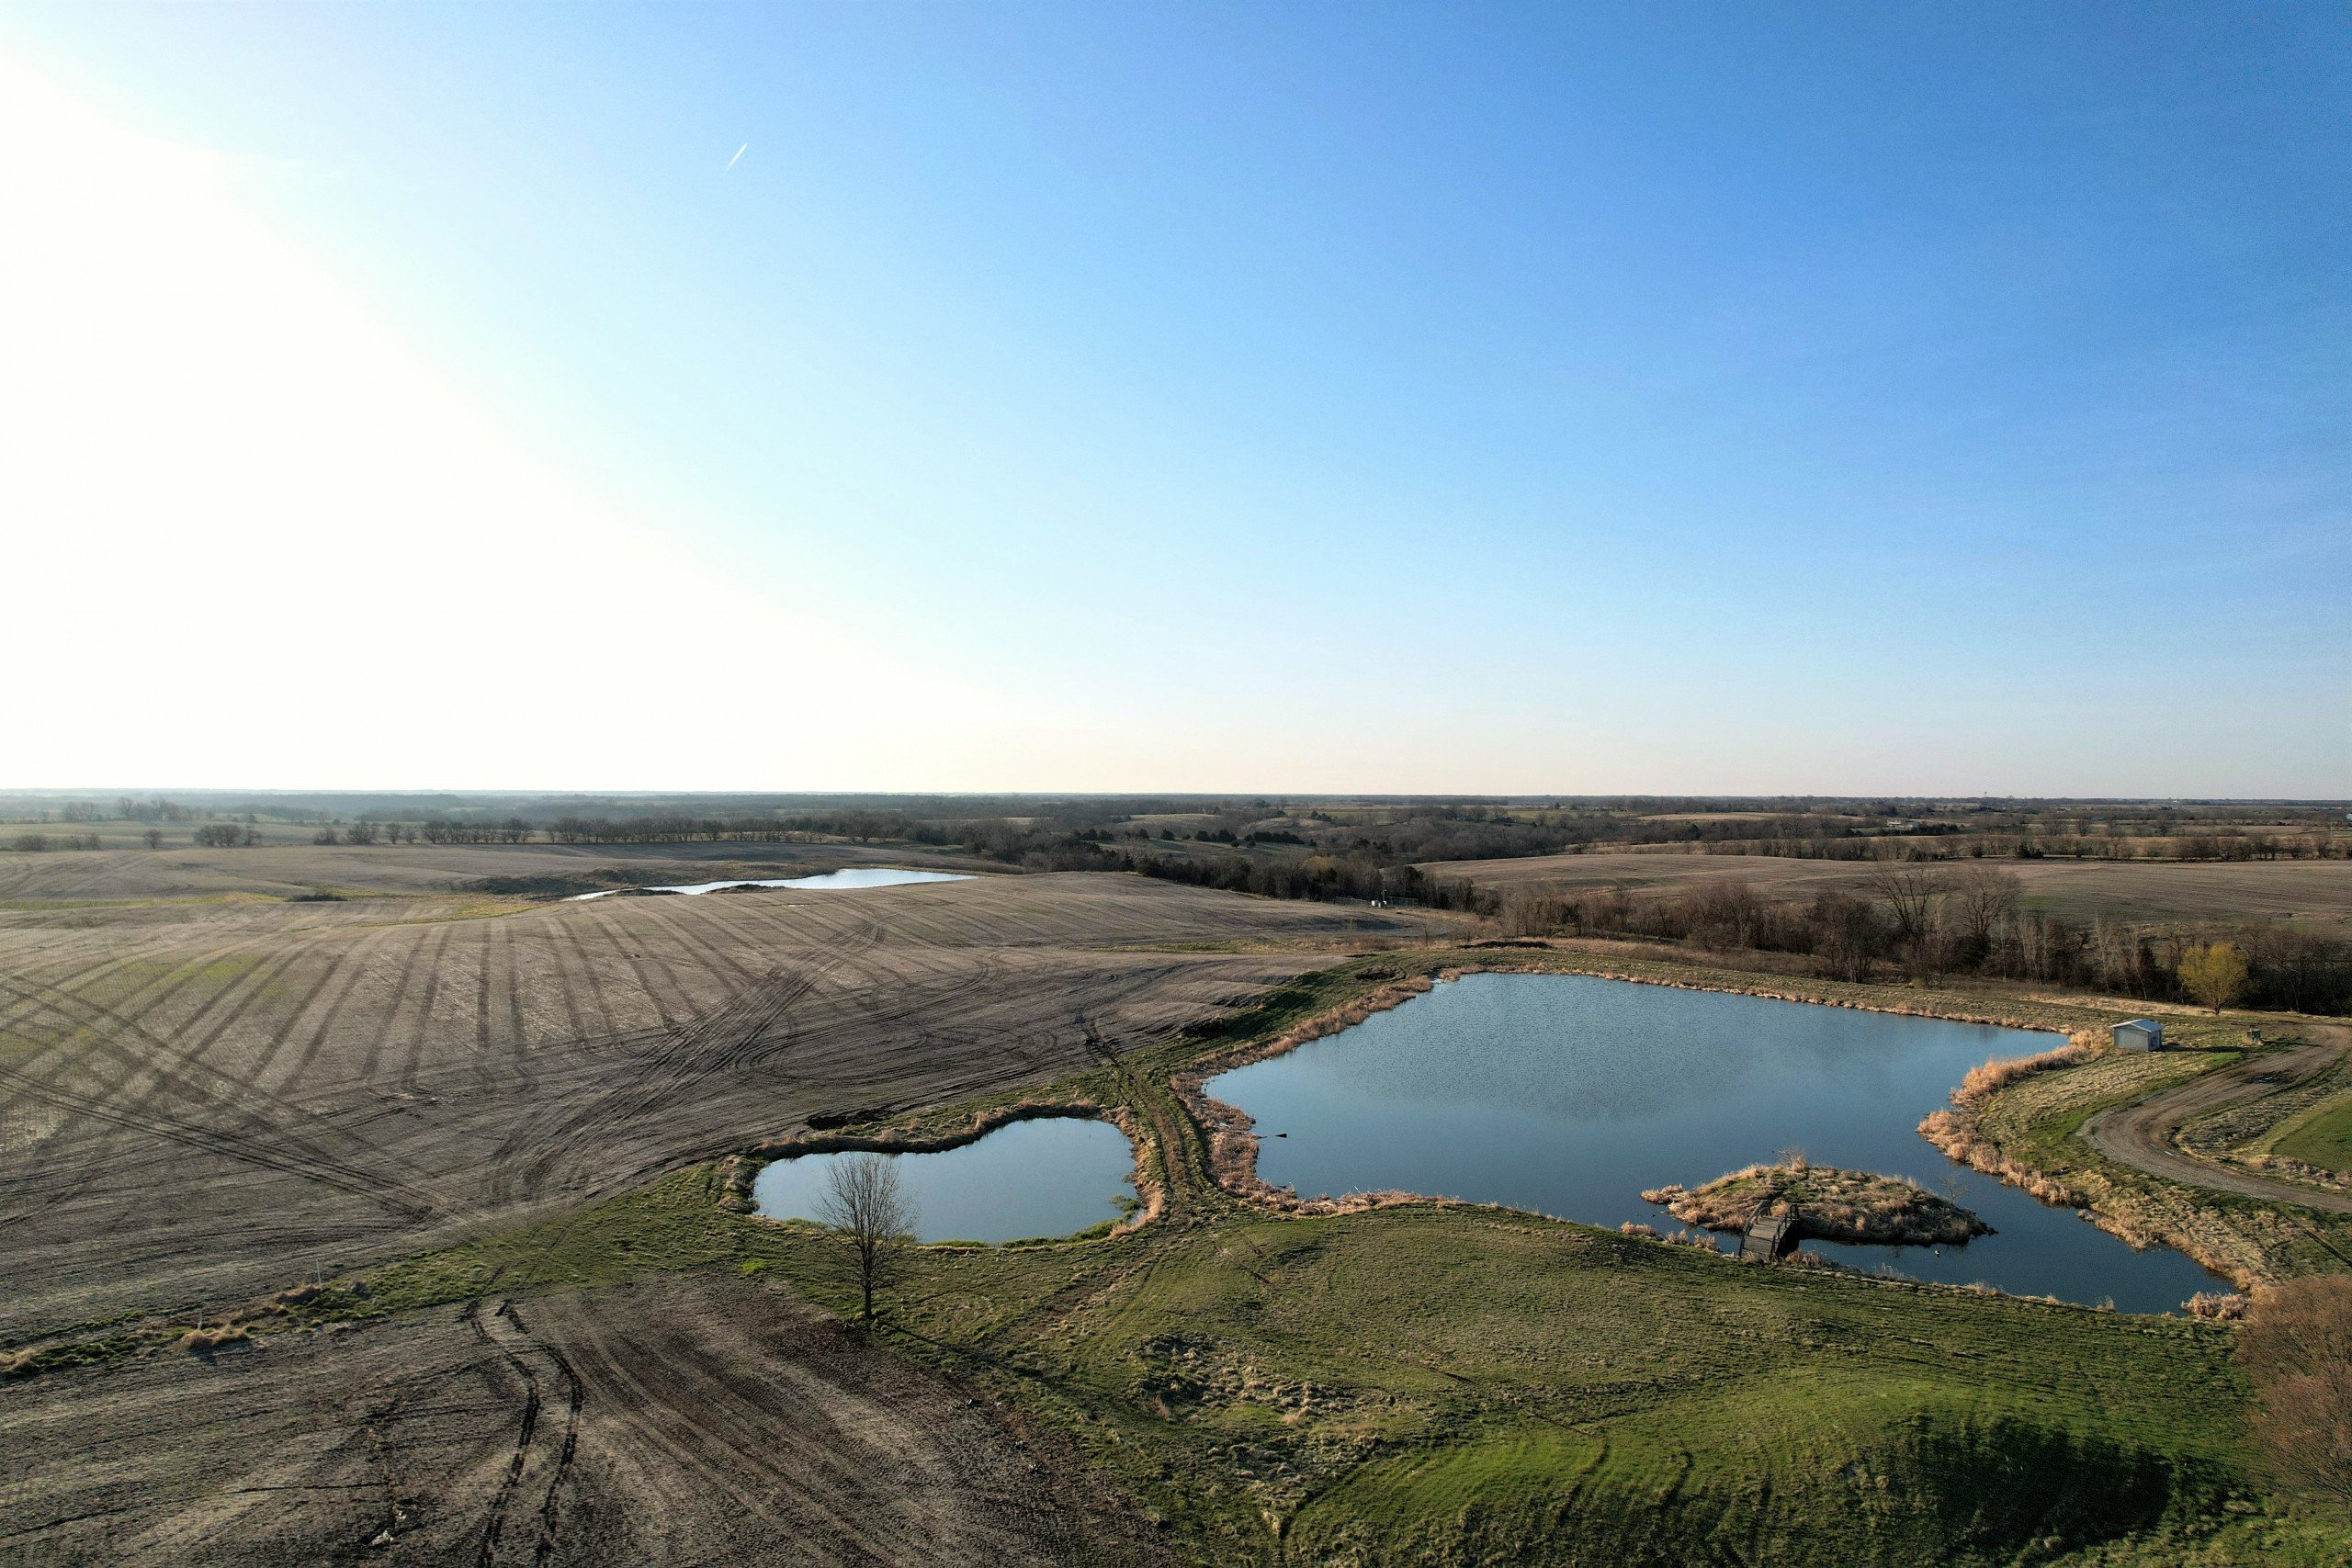 land-appanoose-county-iowa-97-acres-listing-number-16163-Copy of Copy of DJI_0254-1.jpg